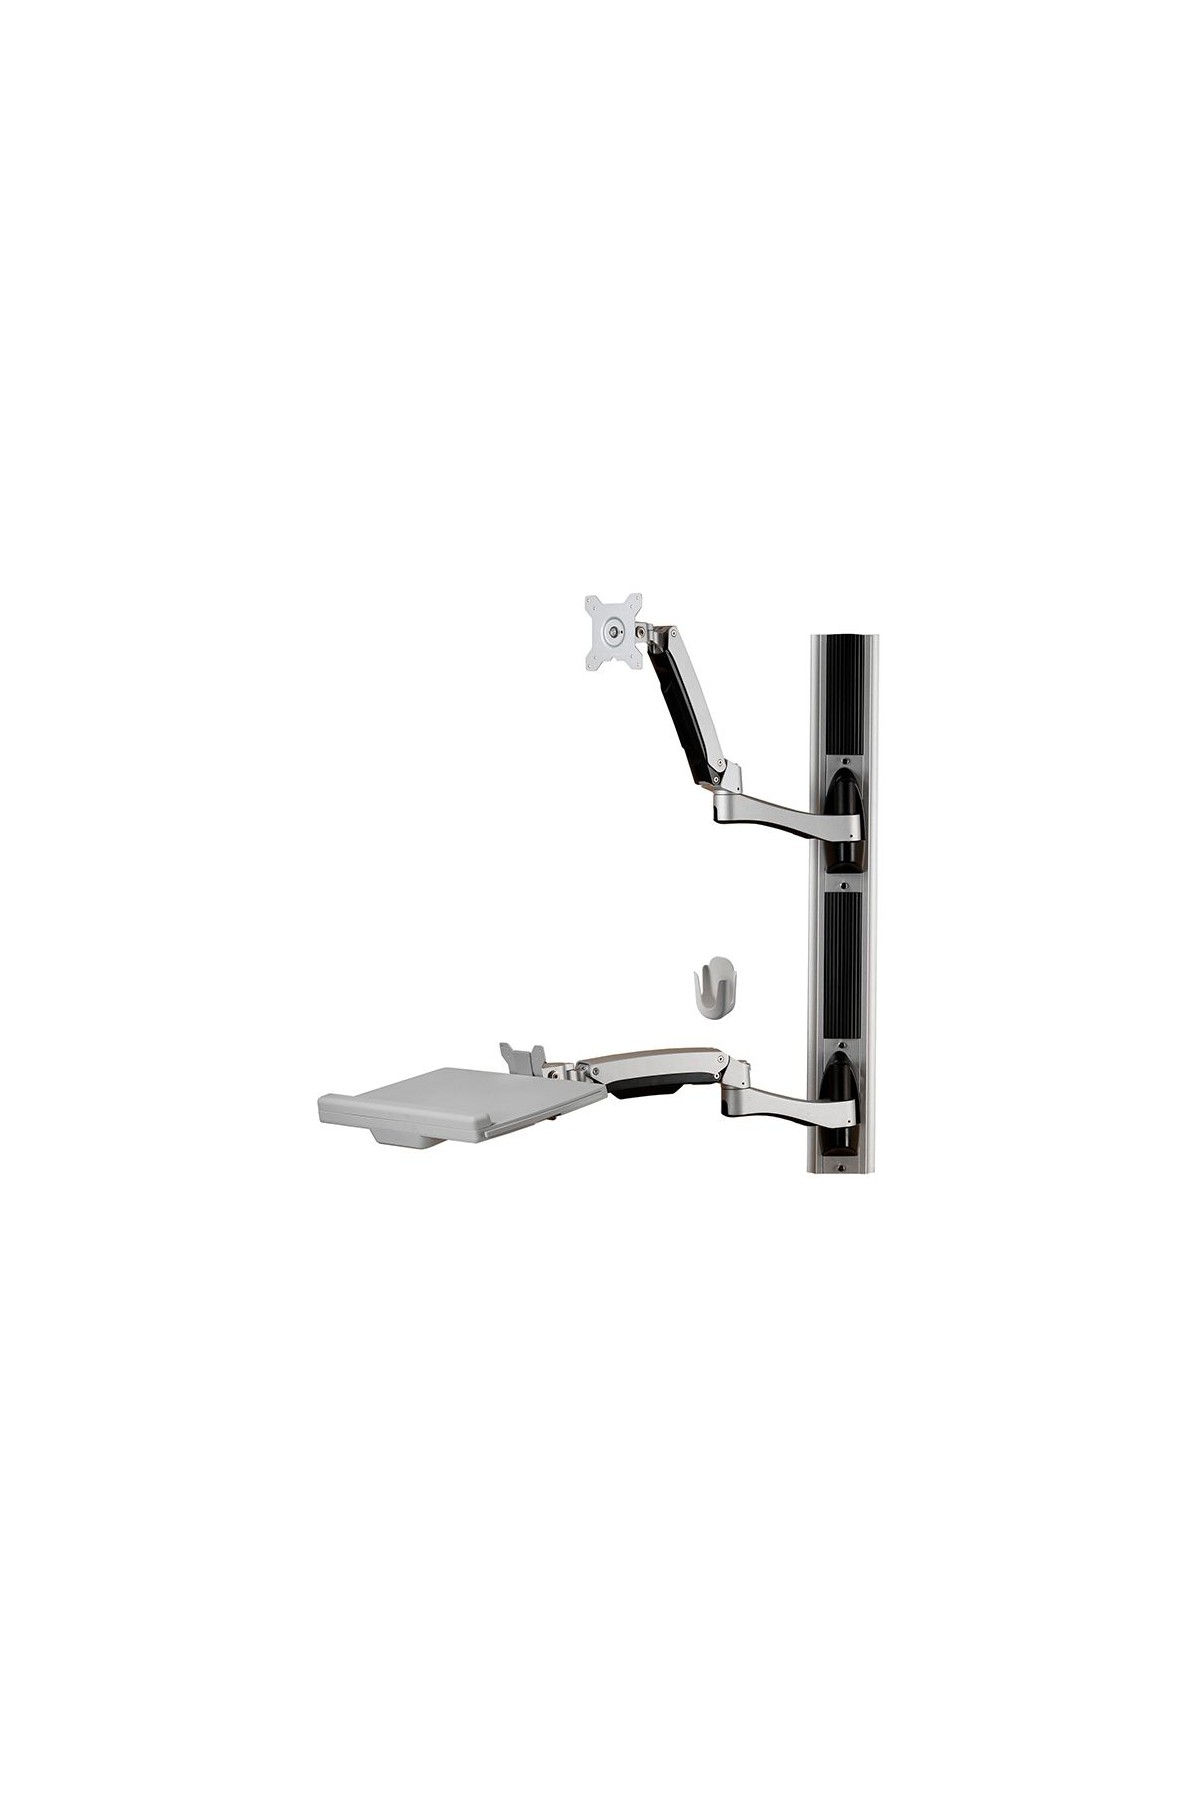 Aavara W8822 Workstation Column Combo System - Dual arms